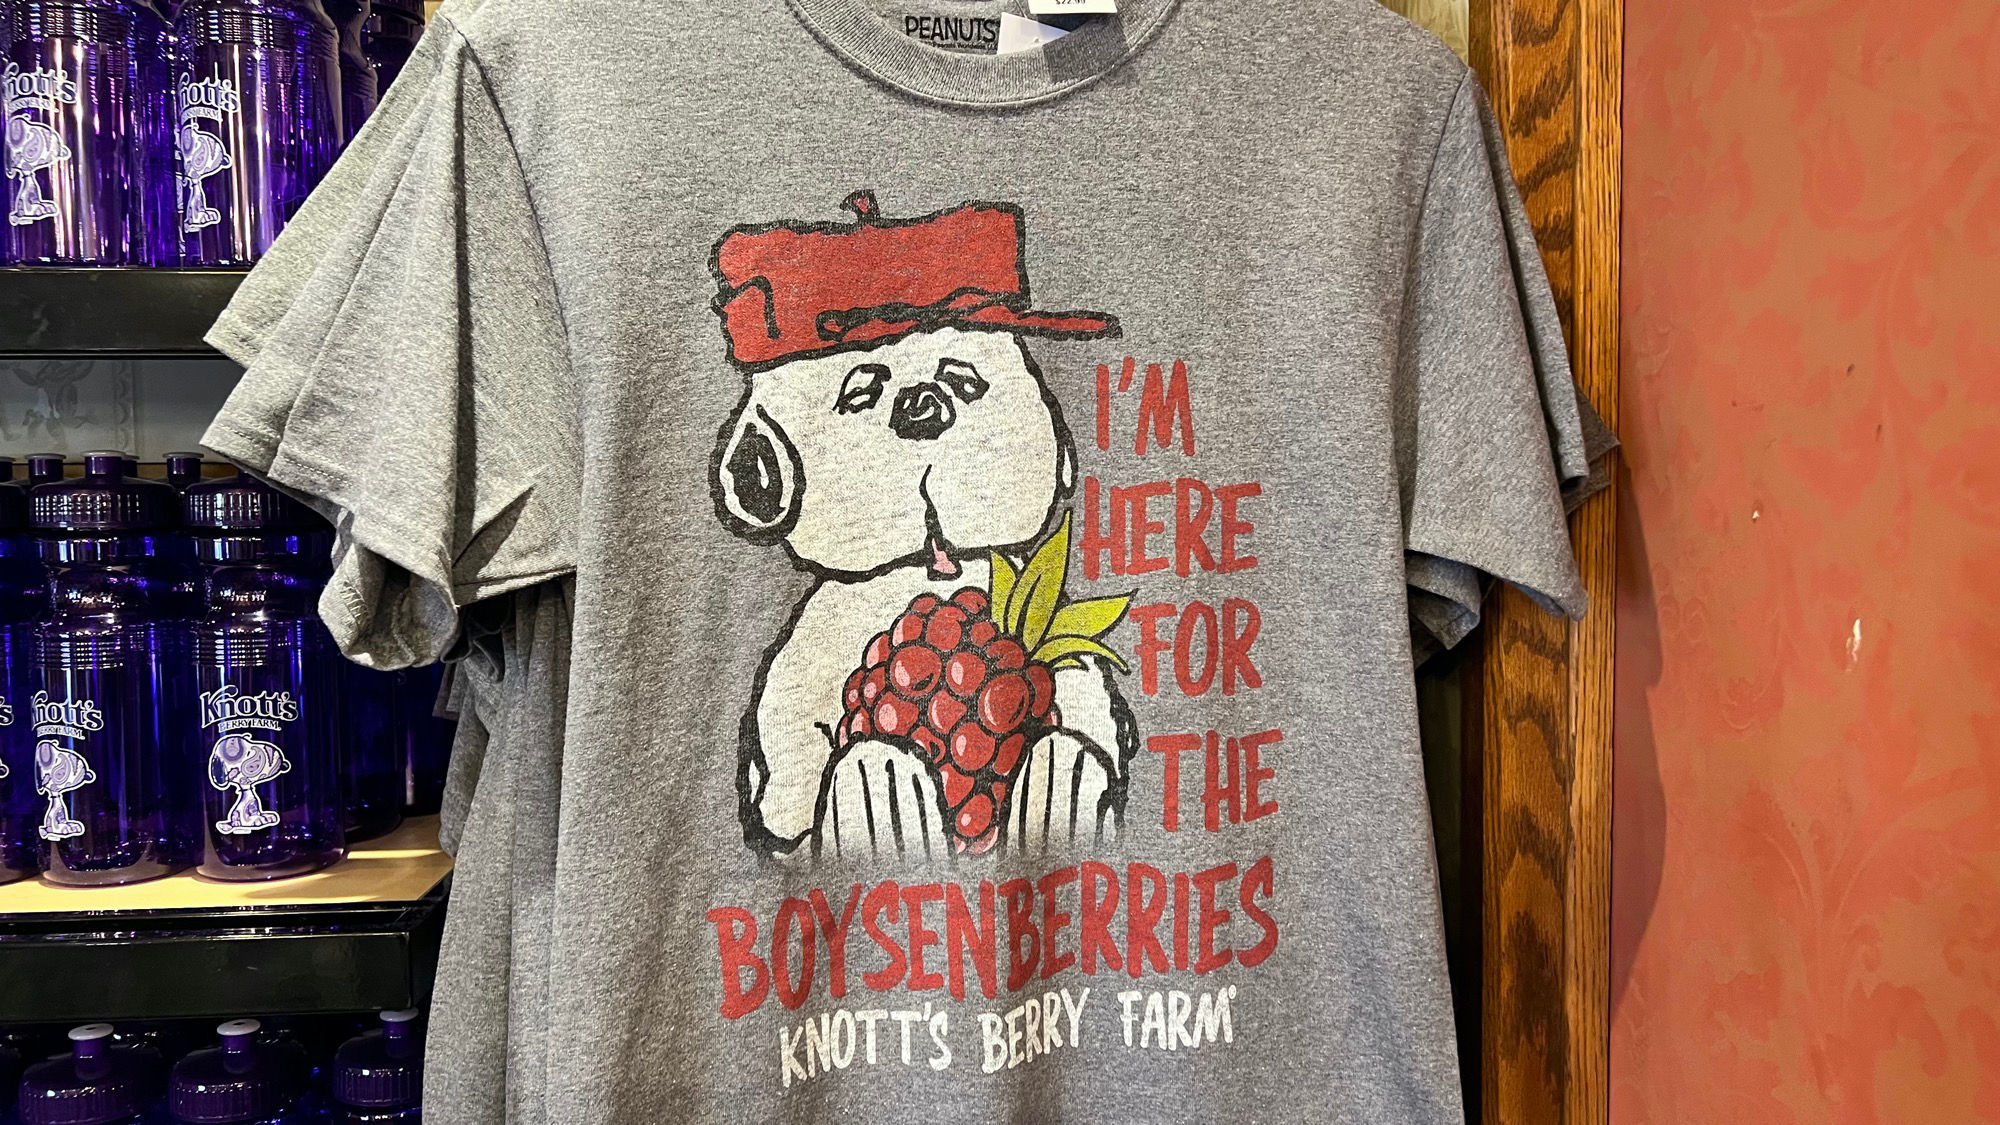 Gold Trails Hotel I'm here for the Boysenberries T-Shirt